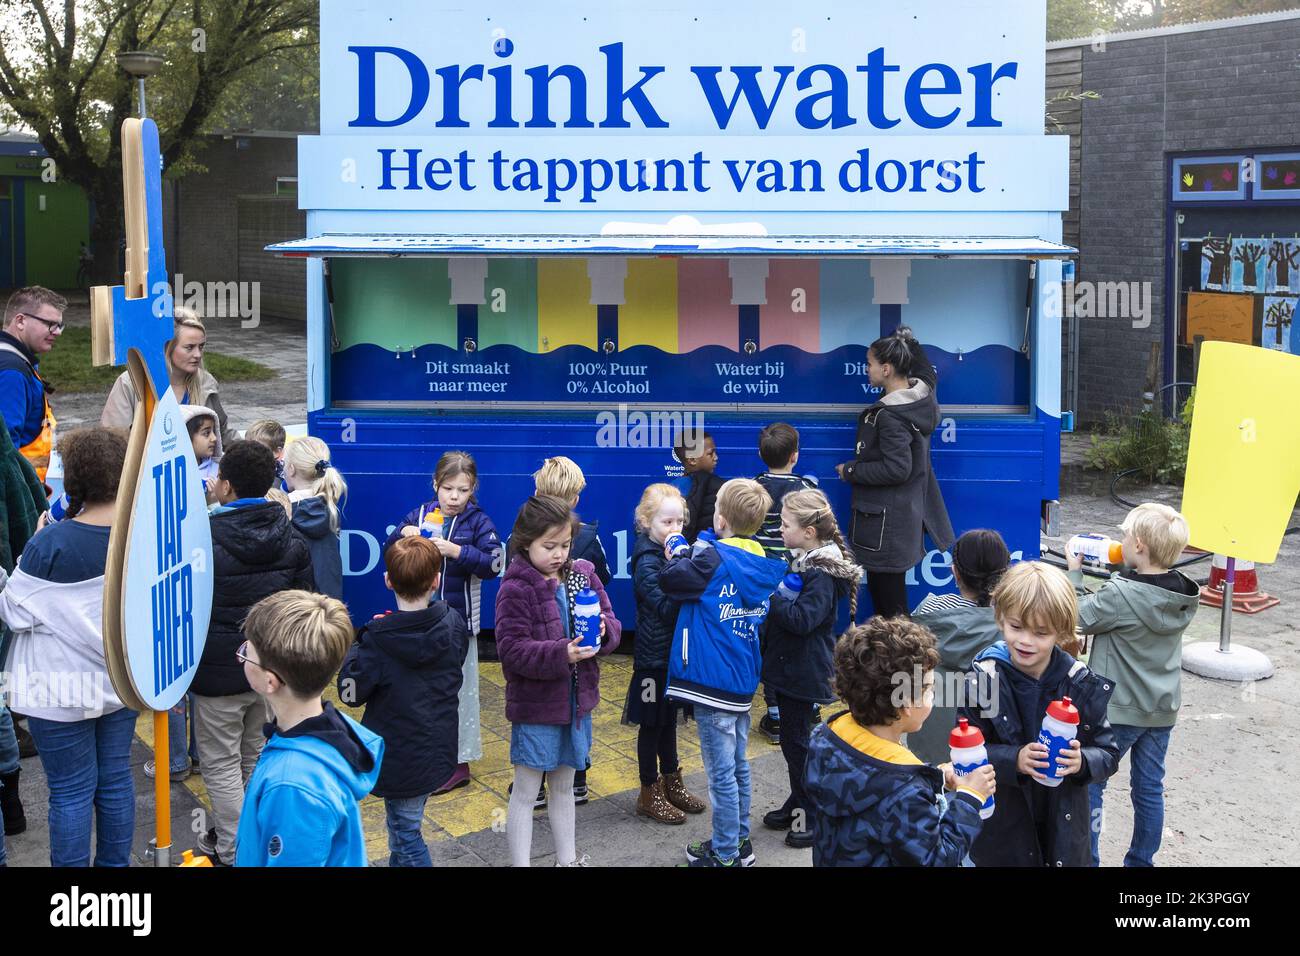 2022-09-28 09:32:50 GRONINGEN - Children tap drinking water during the opening of National Tap Water Day. This school day of approximately 250,000 primary school students is dominated by quandary water policy. ANP VINCENT JANNINK netherlands out - belgium out Stock Photo